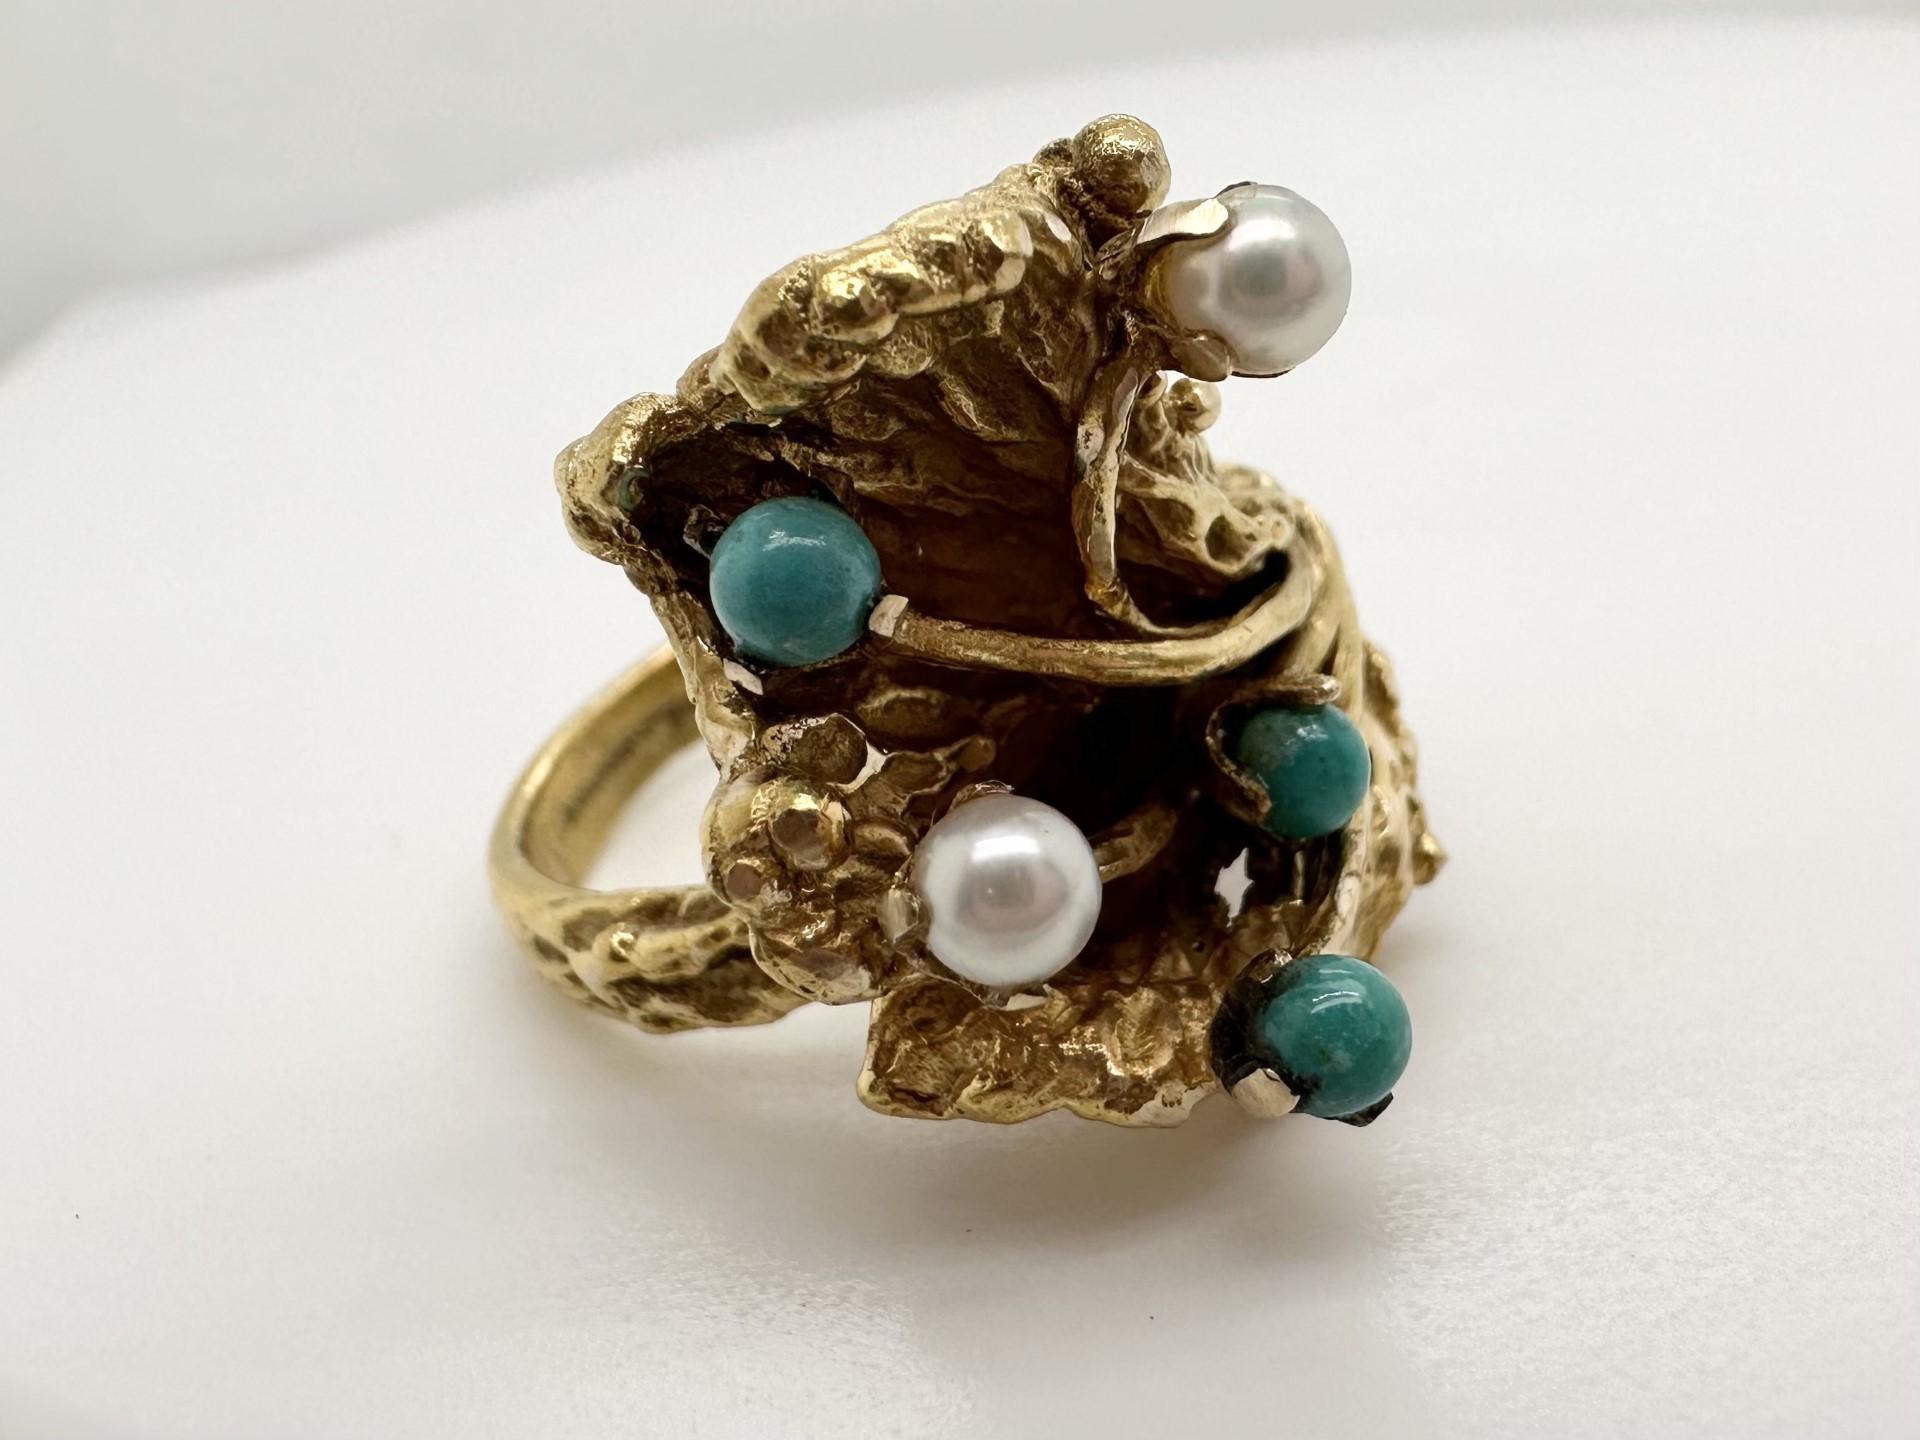 Unique Sea cocktail bouquet ring in 18KT yellow gold with hand craftsmanship of different cravings on gold as well as set turquoise beads and pearls, natural and certified. The ring will come with a box, certificate of authenticity and beautiful